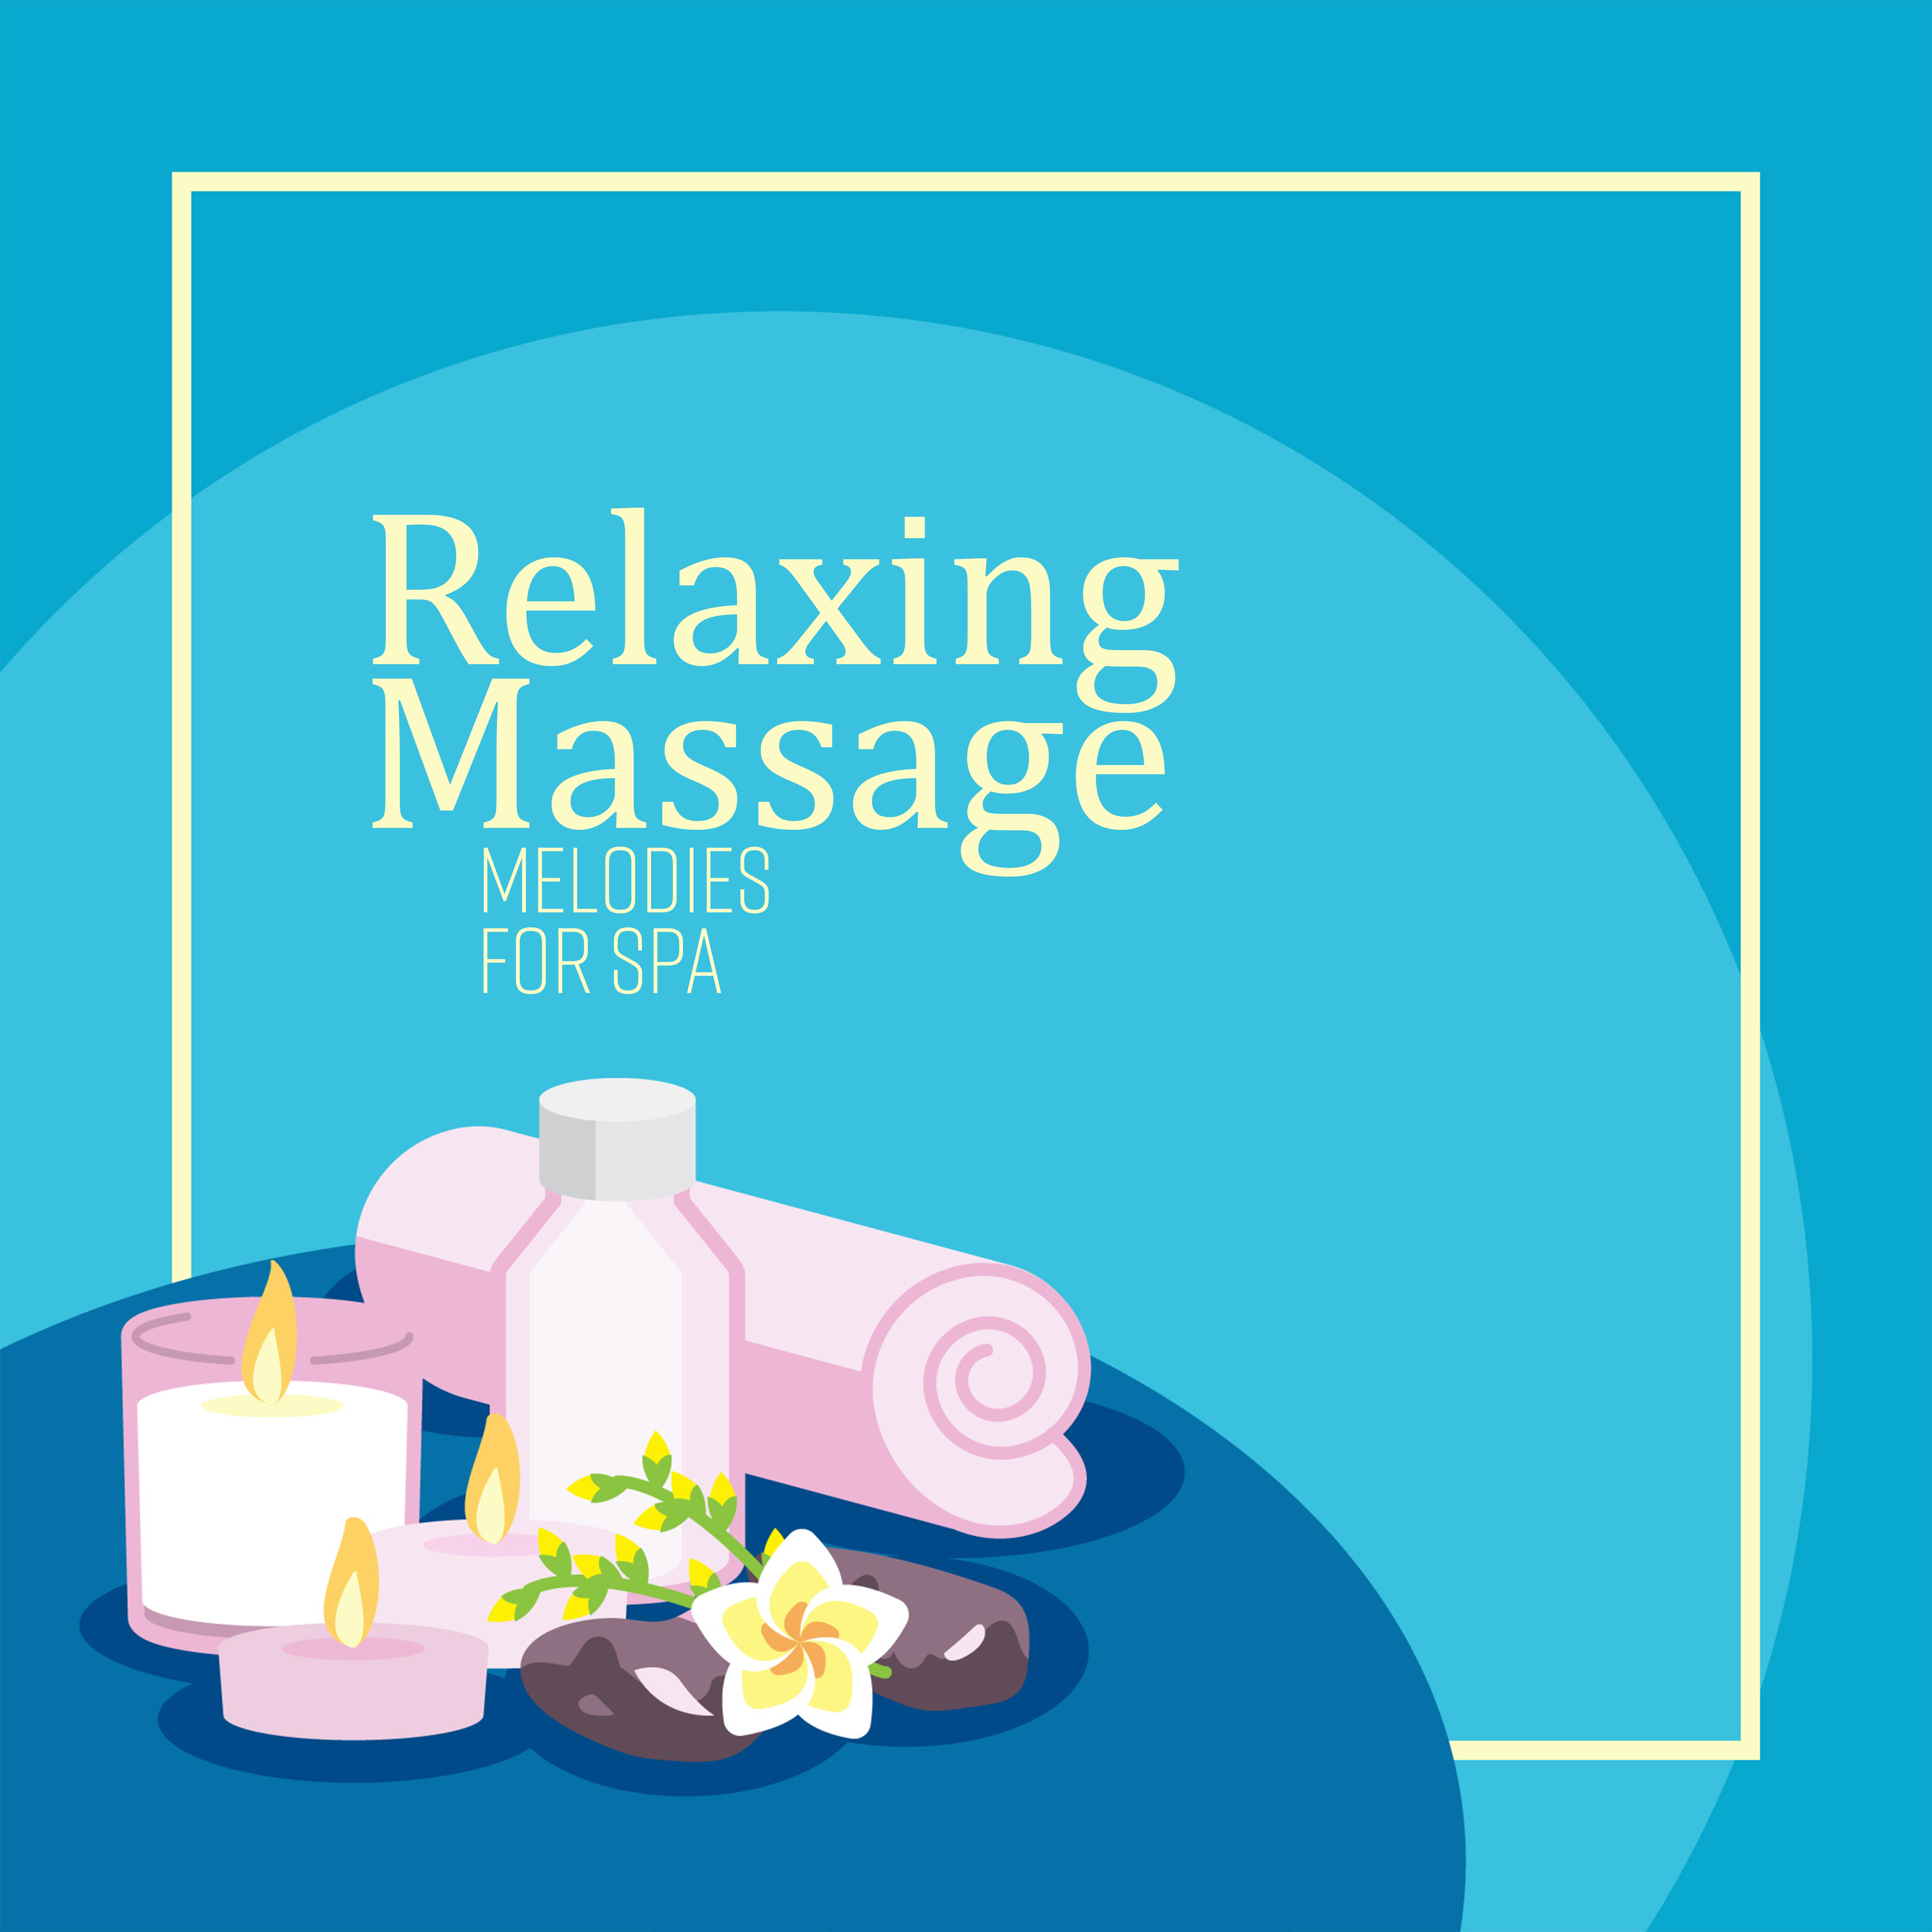 Relaxing Massage Melodies for Spa